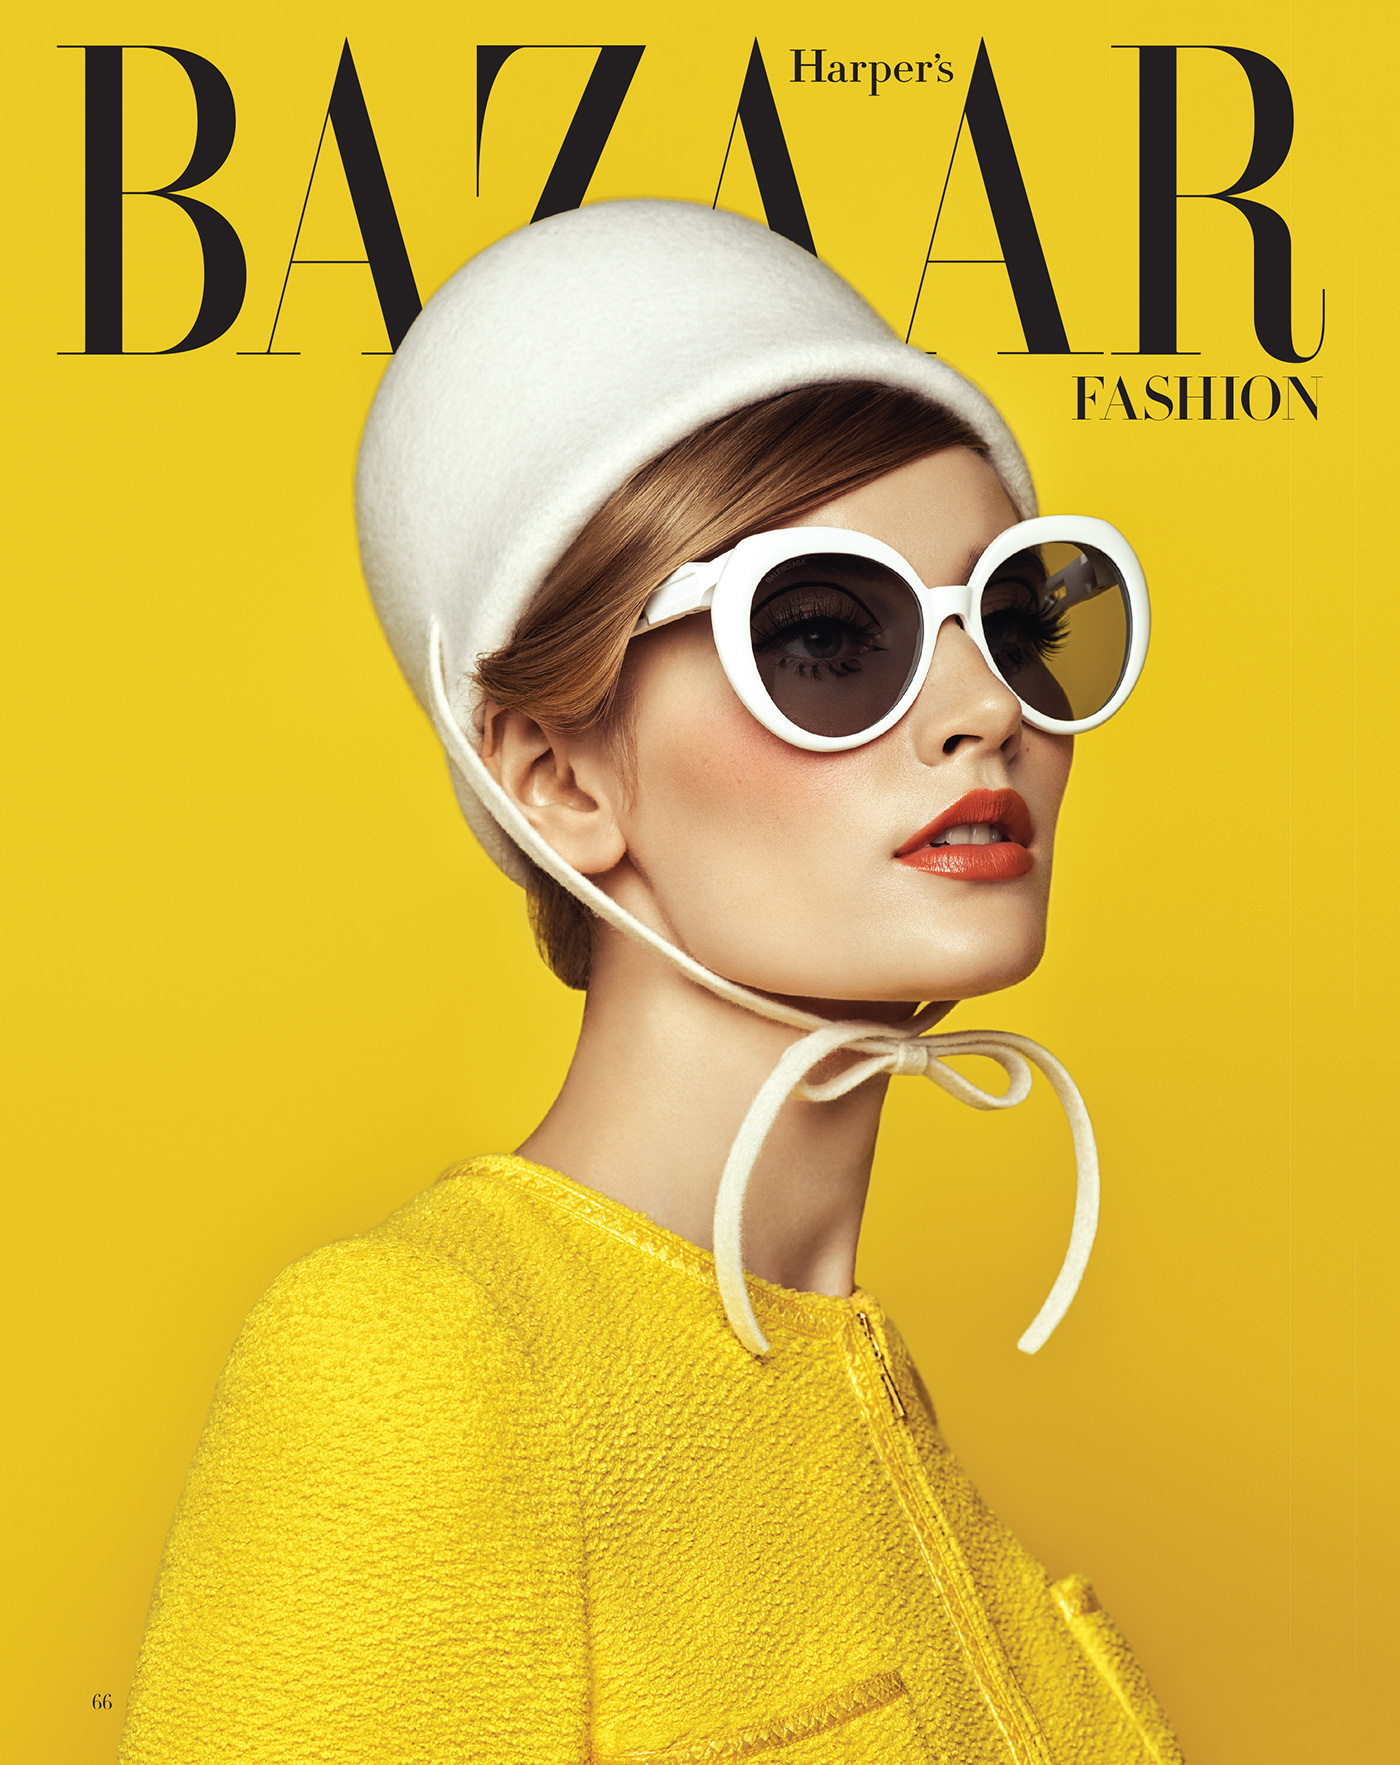 60's style editorial Fashion  fashion photography Harpers Bazaar magazine Style